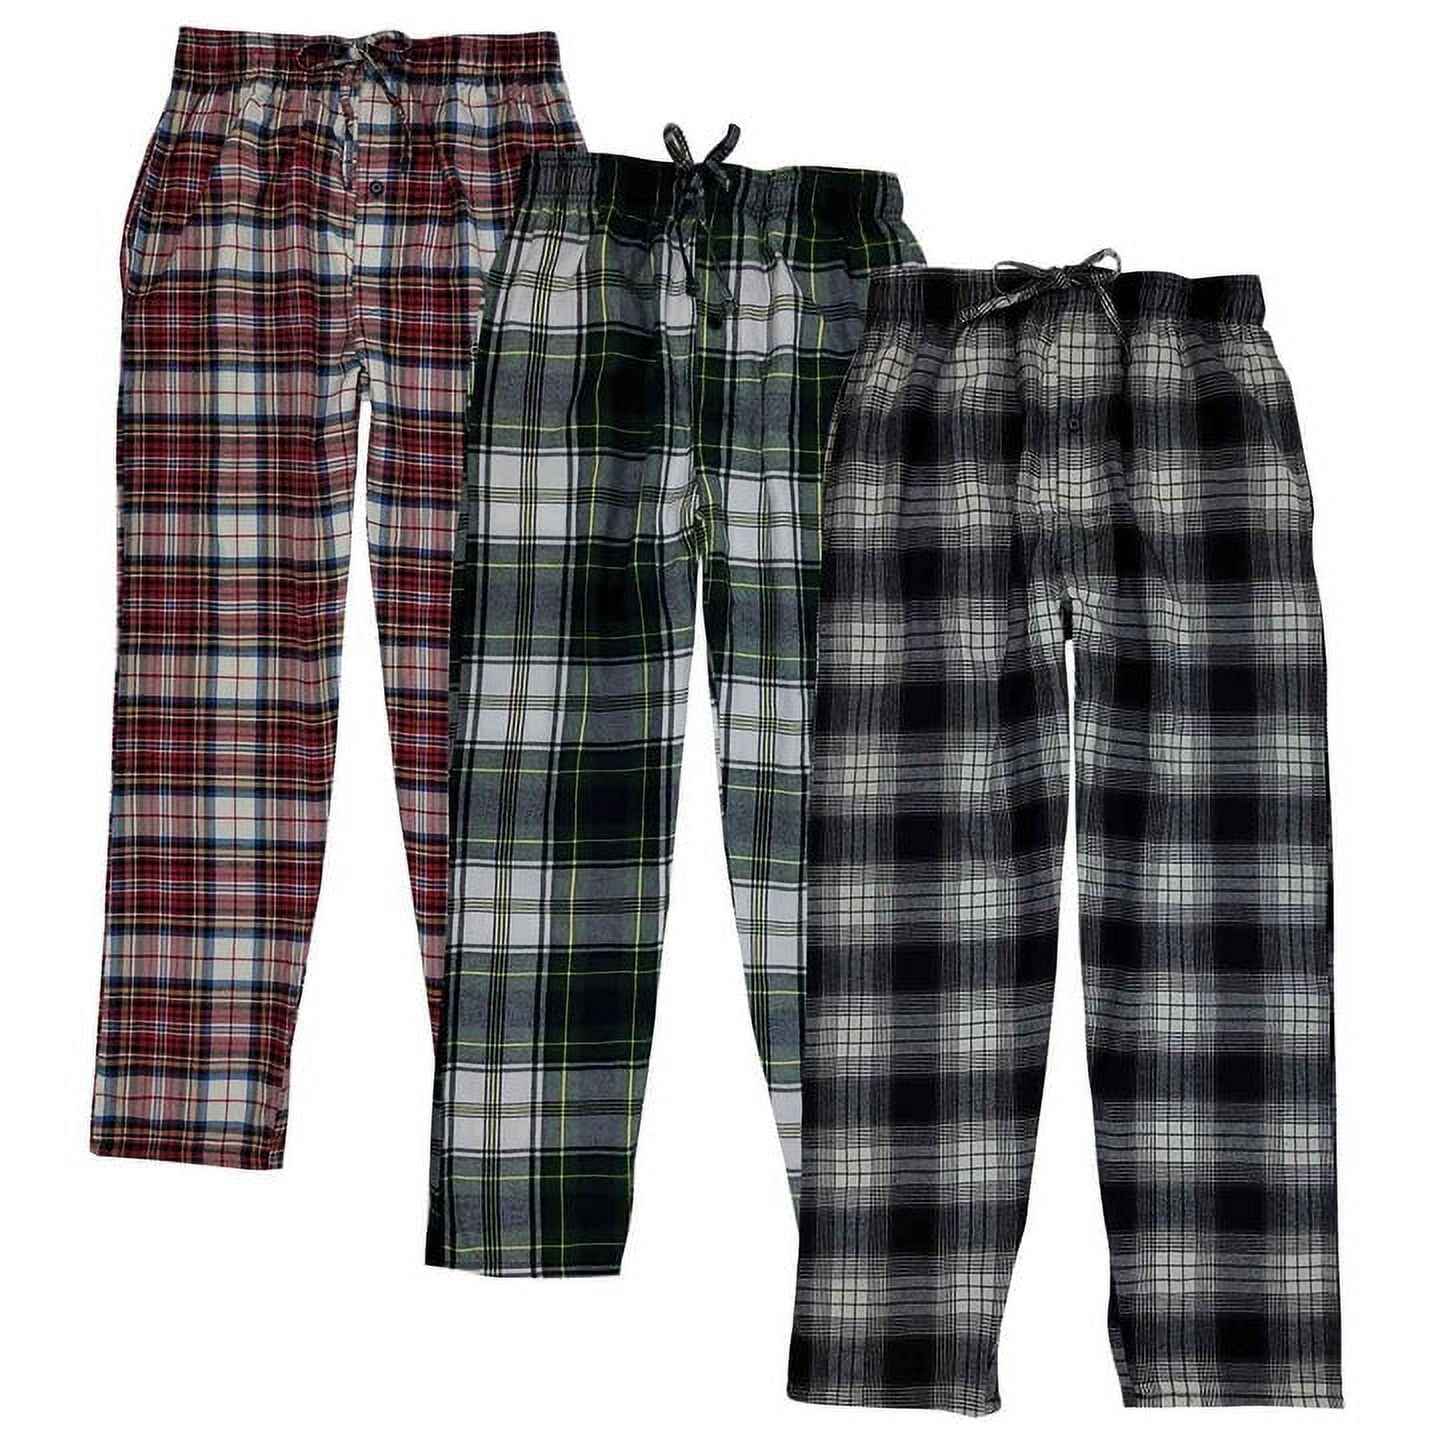 Different Touch Pajama Lounge 100% Cotton Pants Bottoms For Men ...